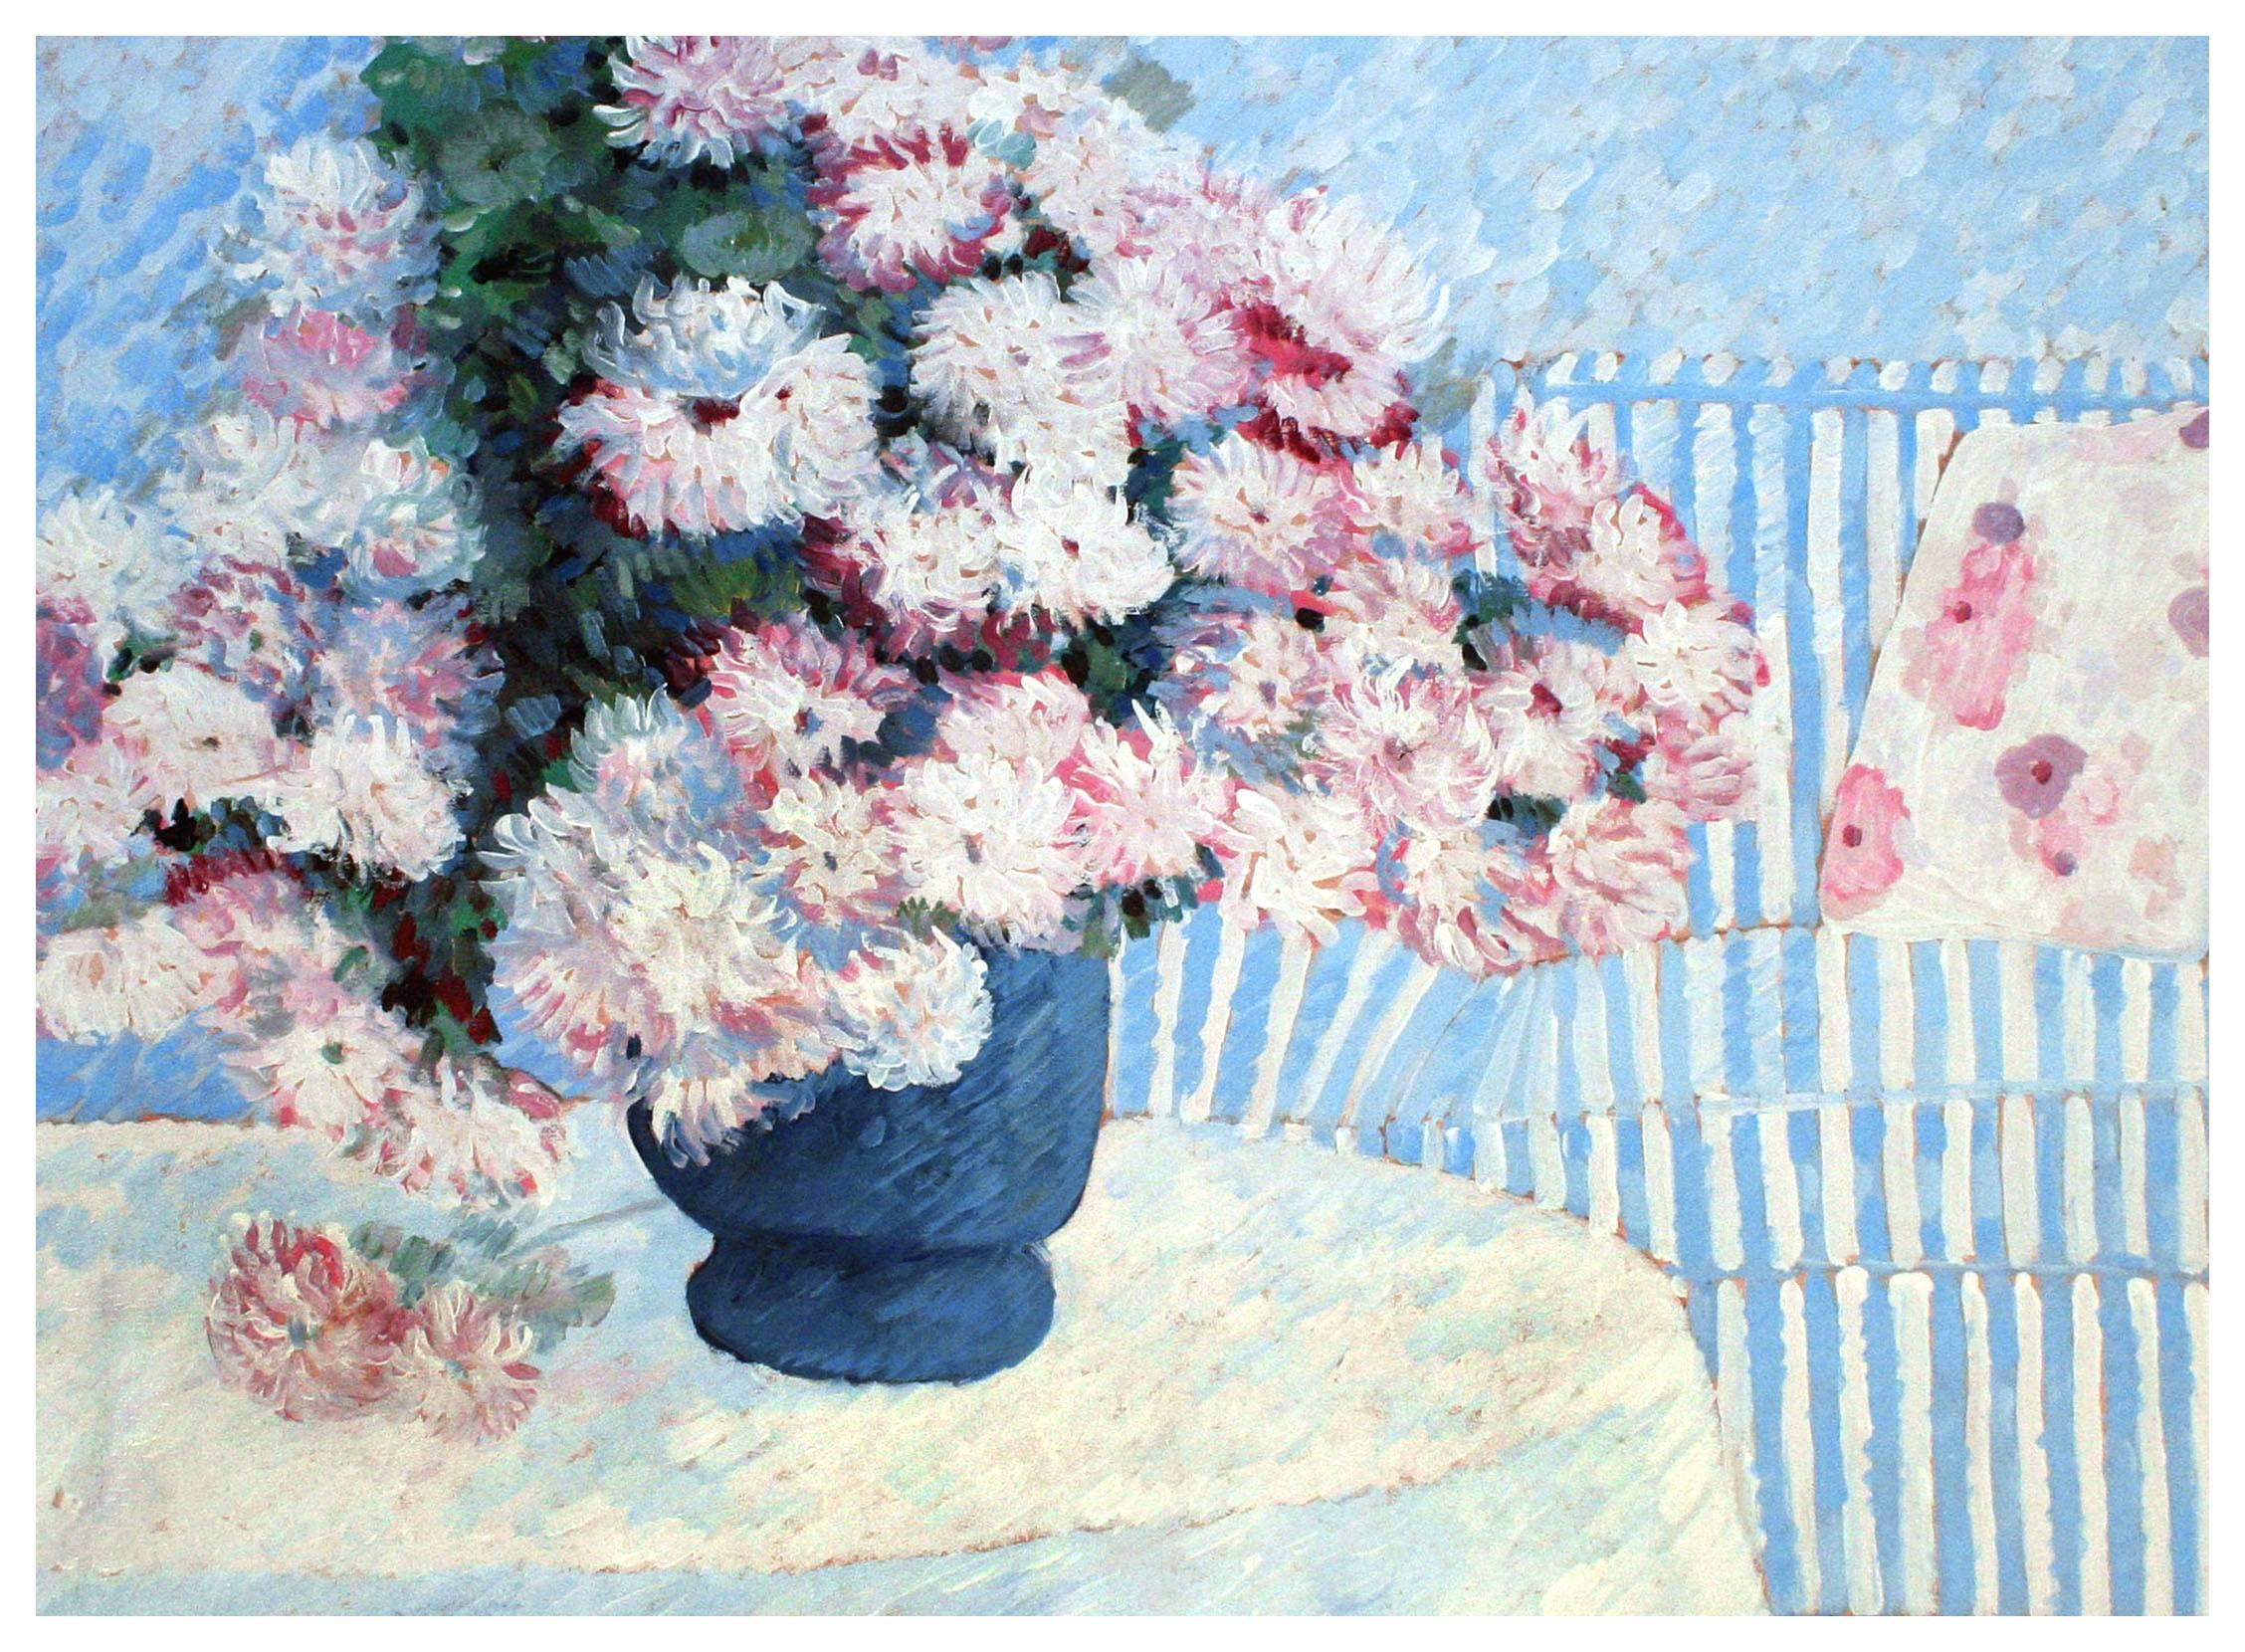 Pink & White Flowers with Blue Striped Couch Still Life - Painting by Bill Bagley